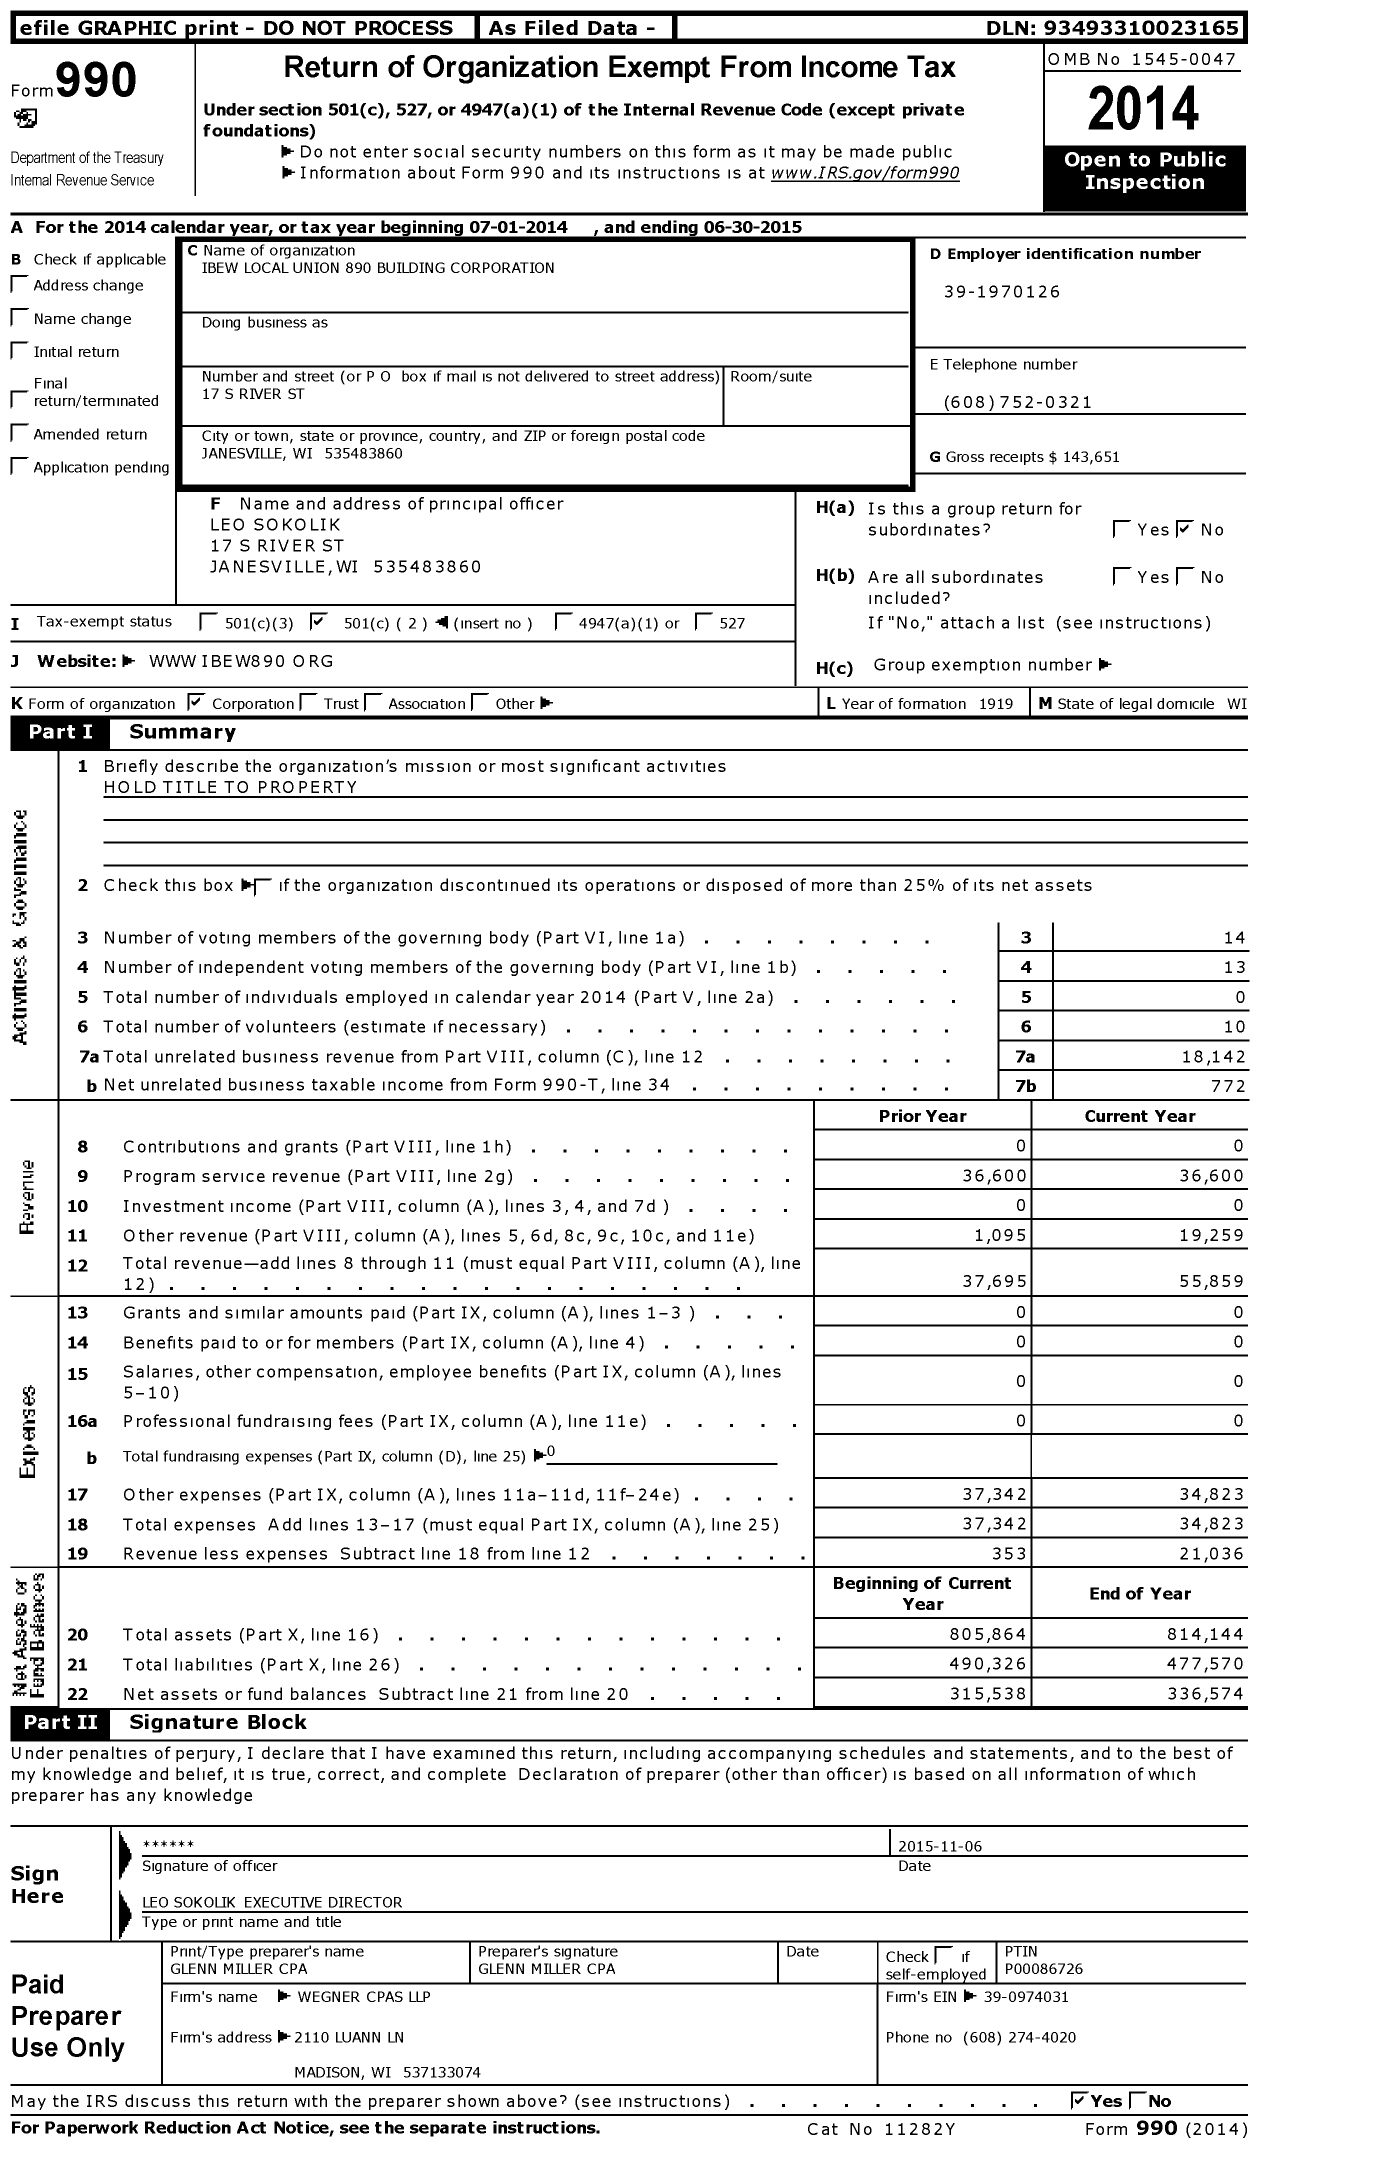 Image of first page of 2014 Form 990O for IBEW Local Union 890 Building Corporation